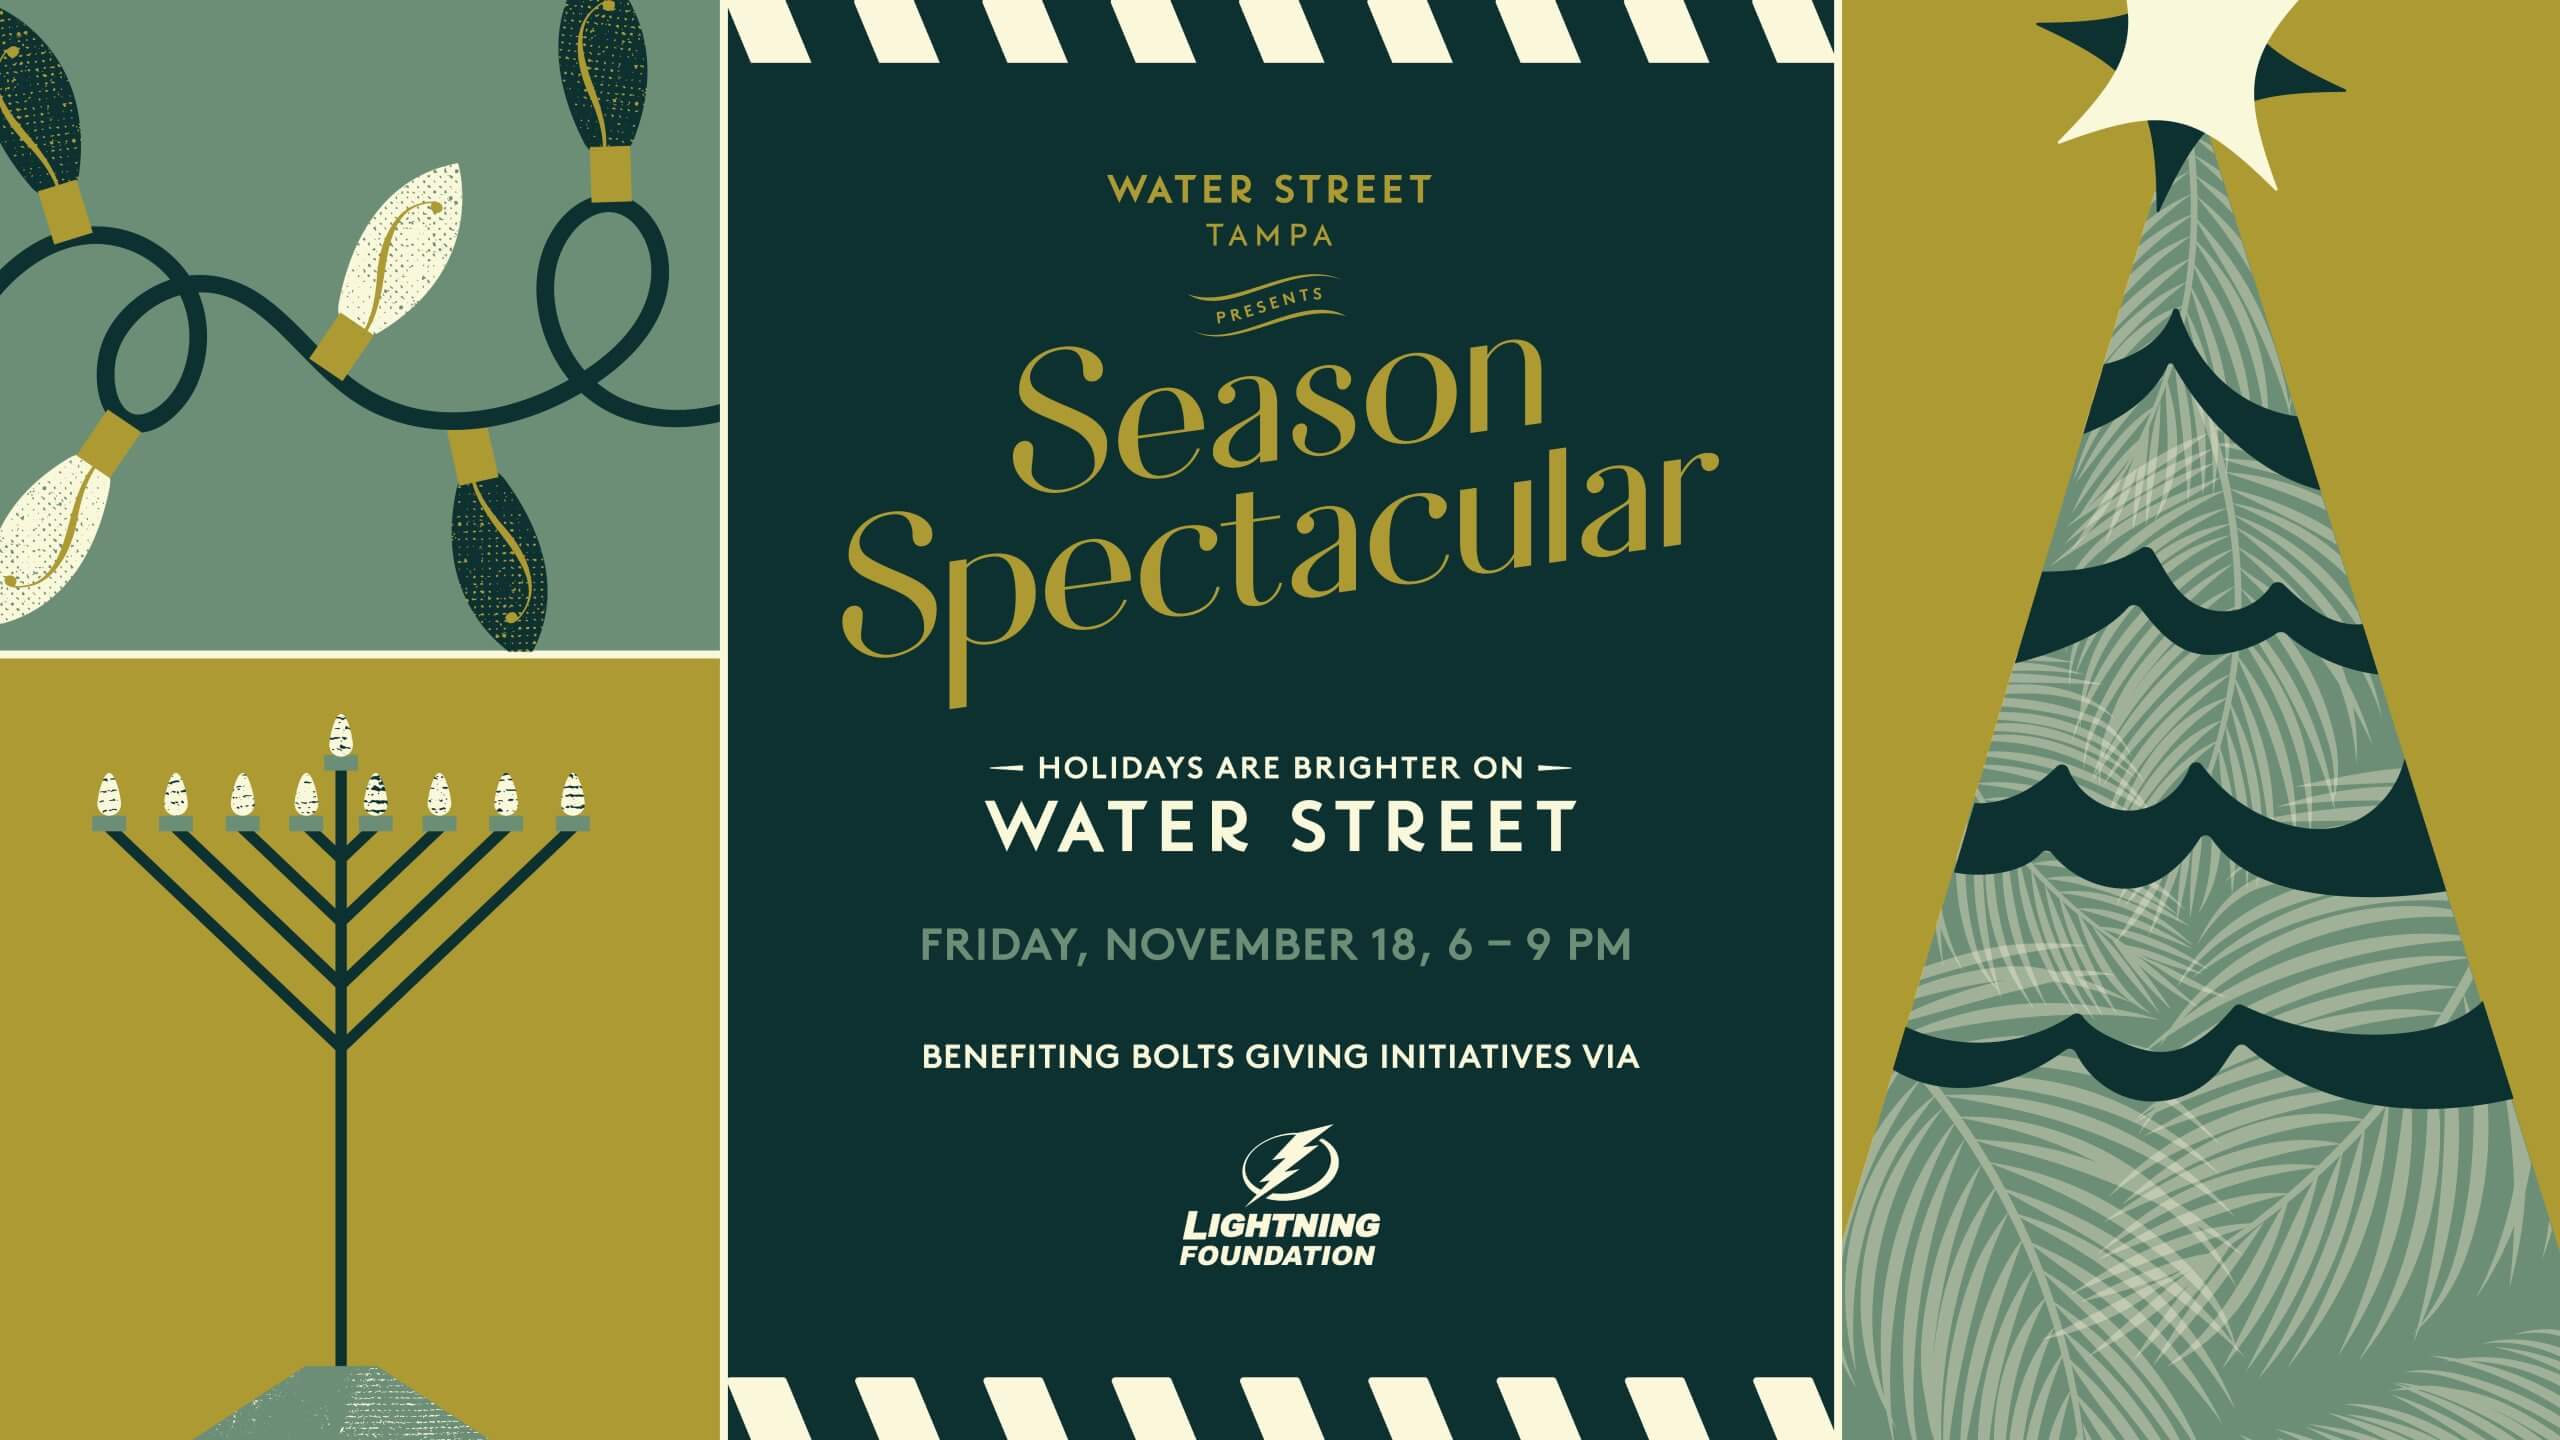 A graphical illustration of Water Street Tampa's Season Spectacular event